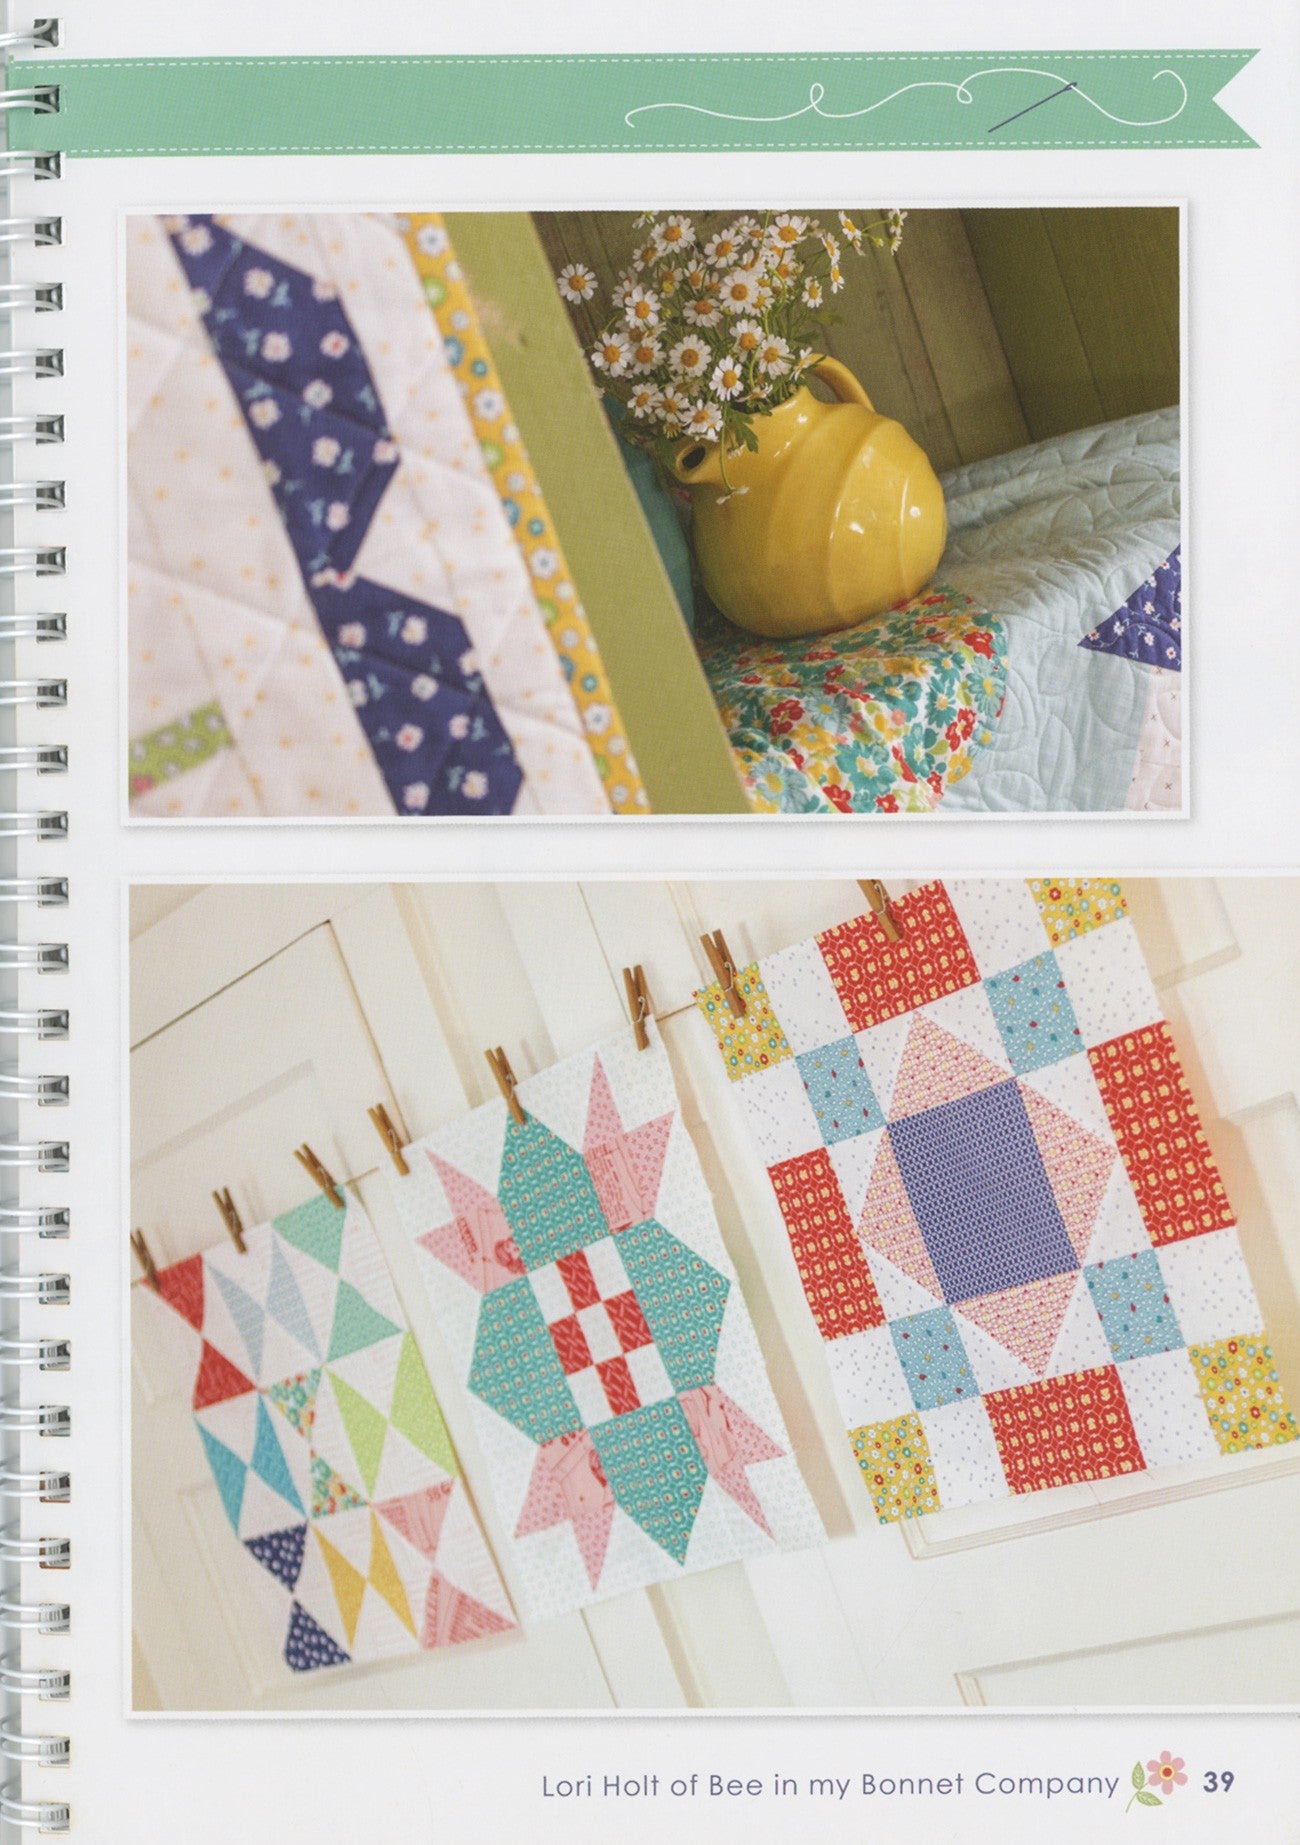 Quilter's Cottage Quilt Pattern Book by Lori Holt for It's Sew Emma